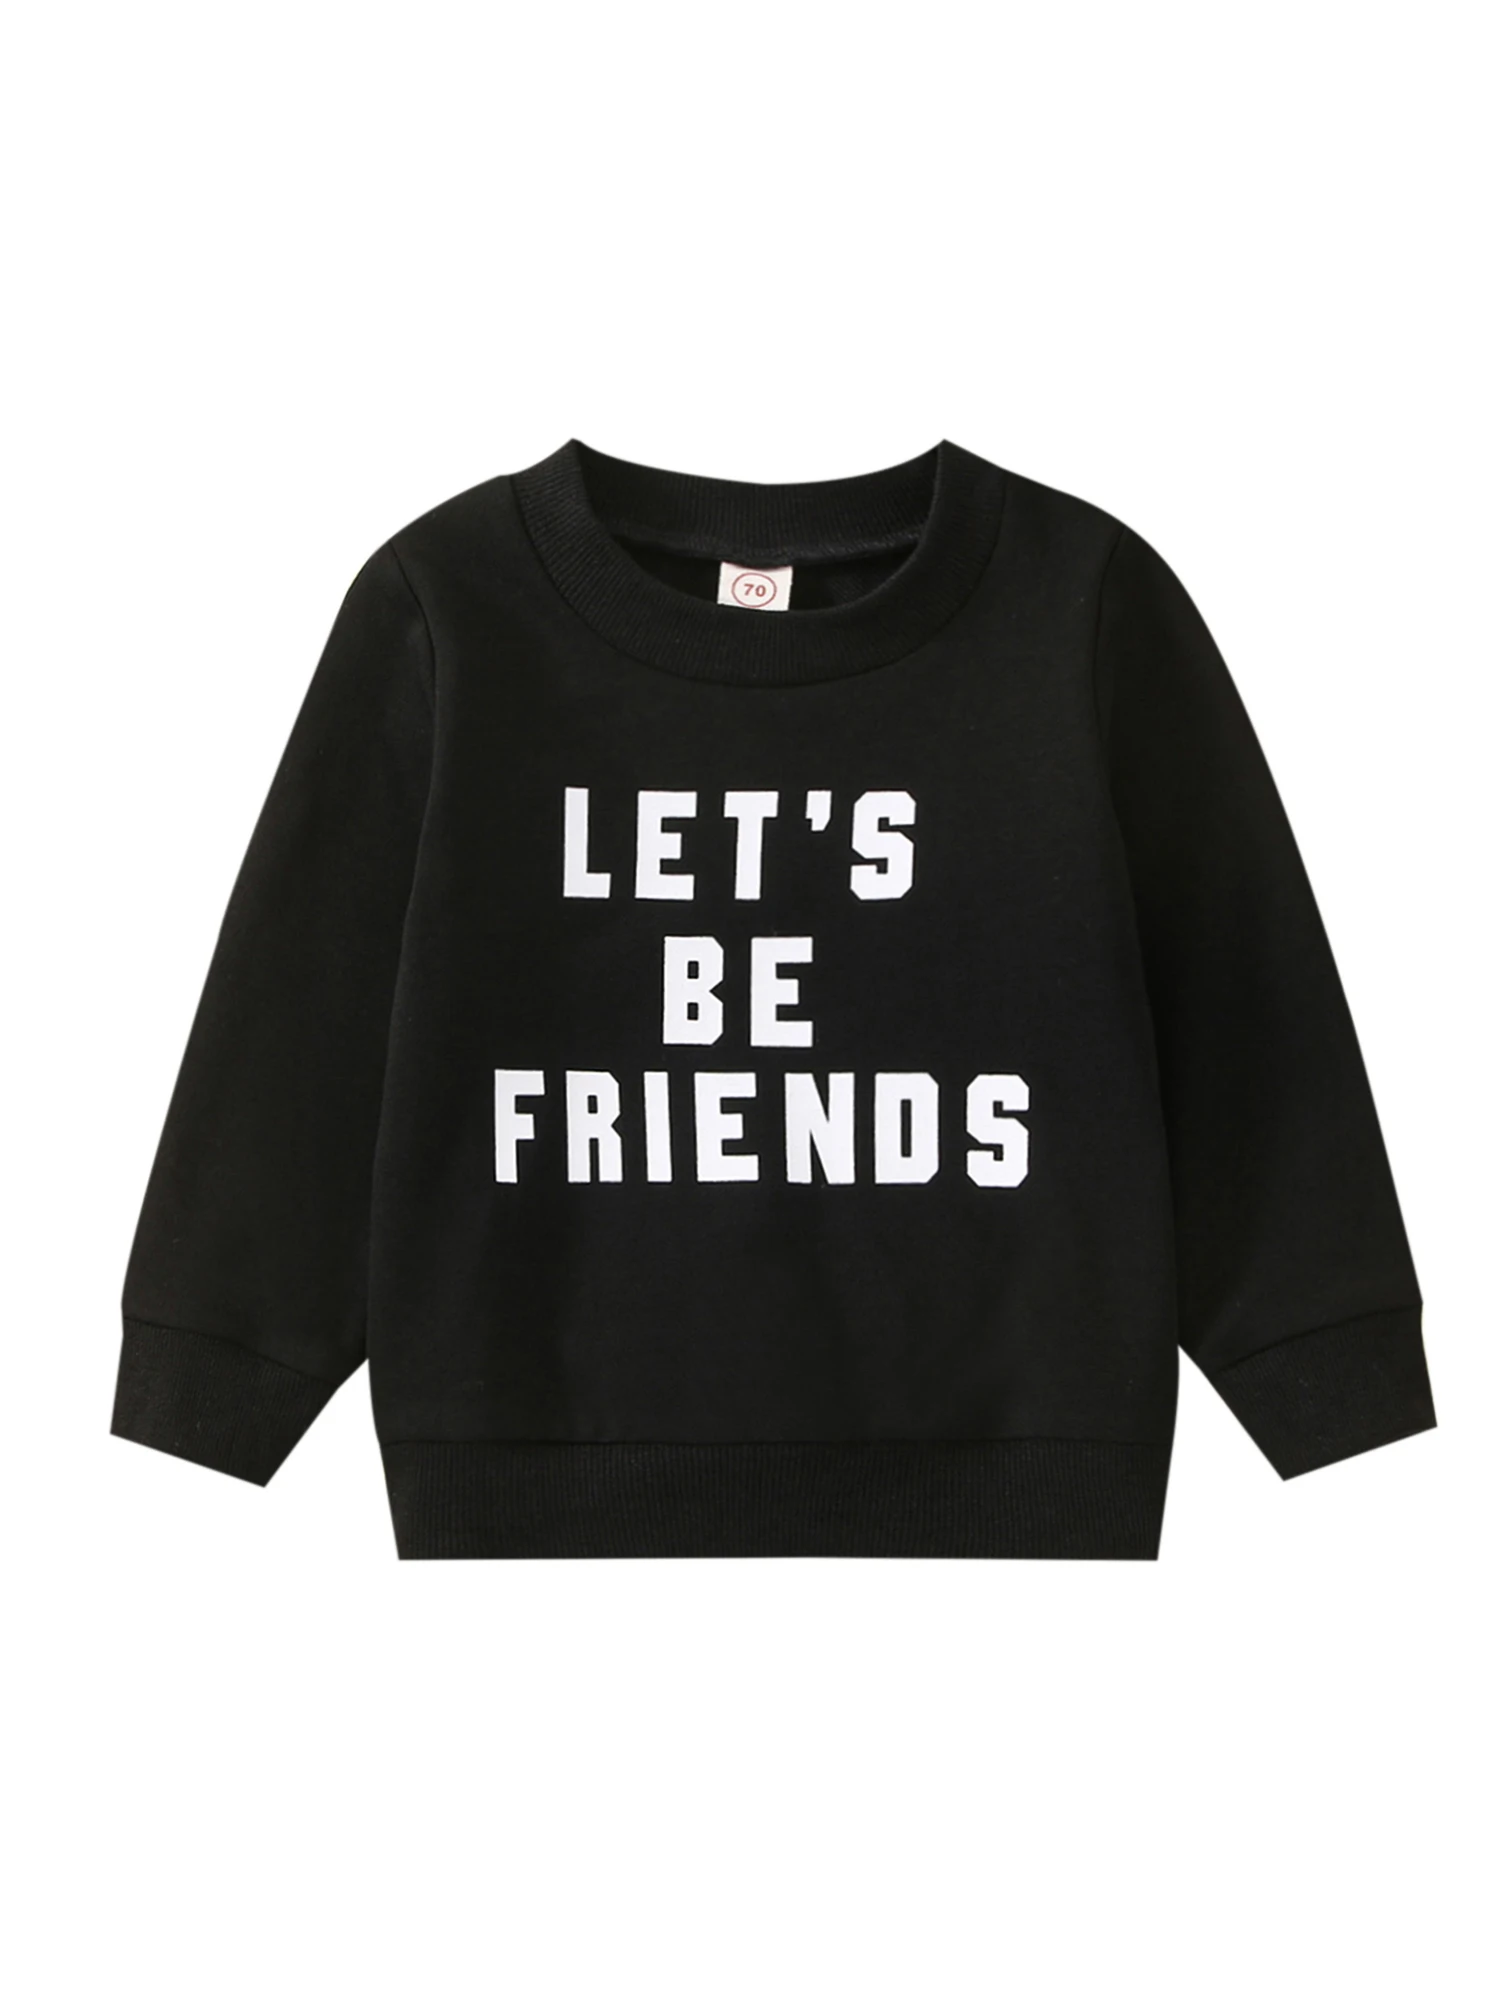 Toddler Baby Boys Girls Sweatshirt Clothes Letter Printed Long Sleeve Crew Neck Loose Fit Pullover Sweater Tops